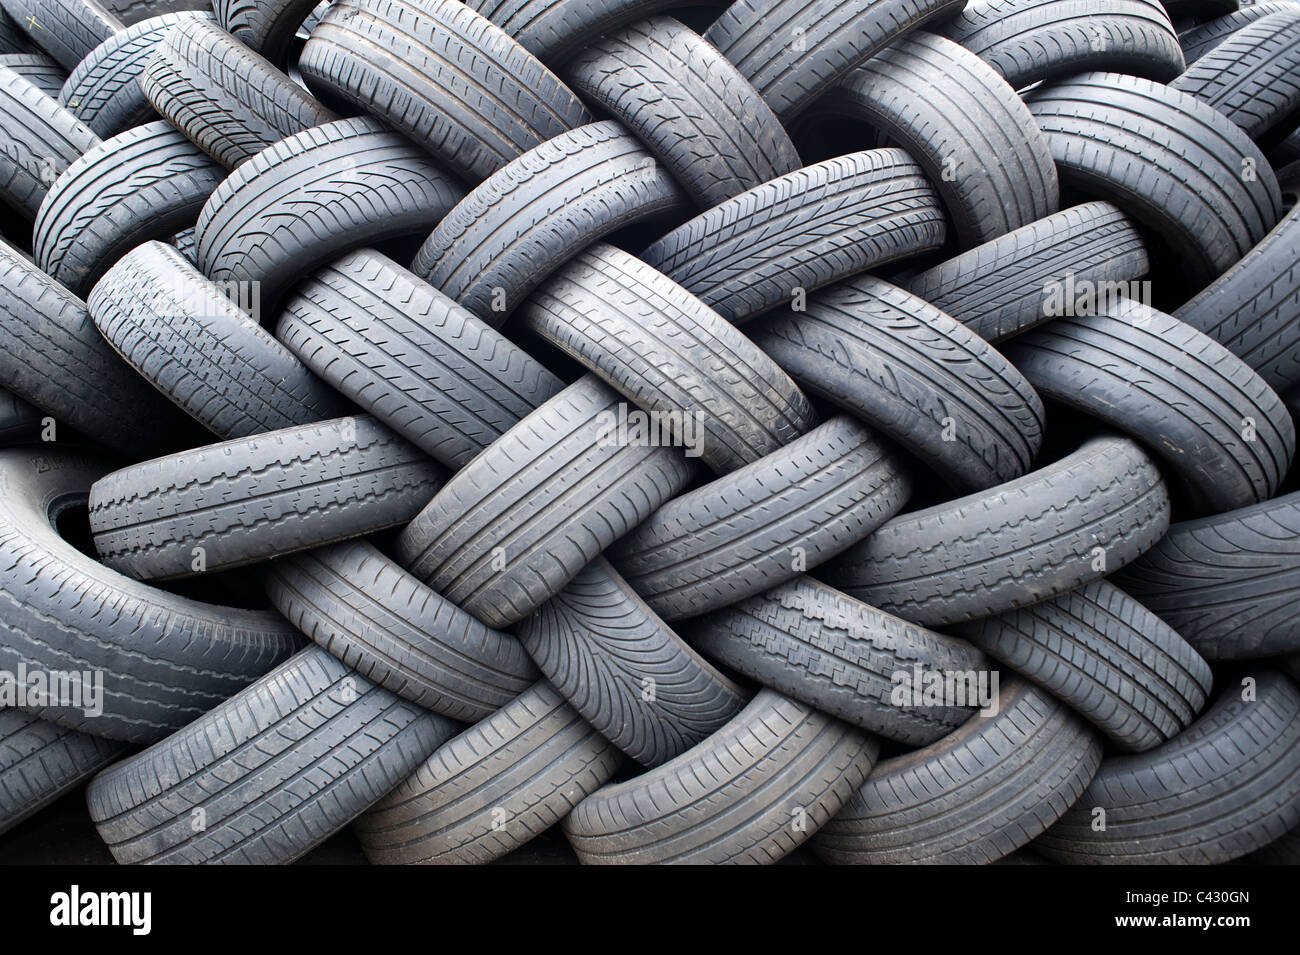 A large number of tyres sit neatly in an interwoven stacked pattern. Stock Photo